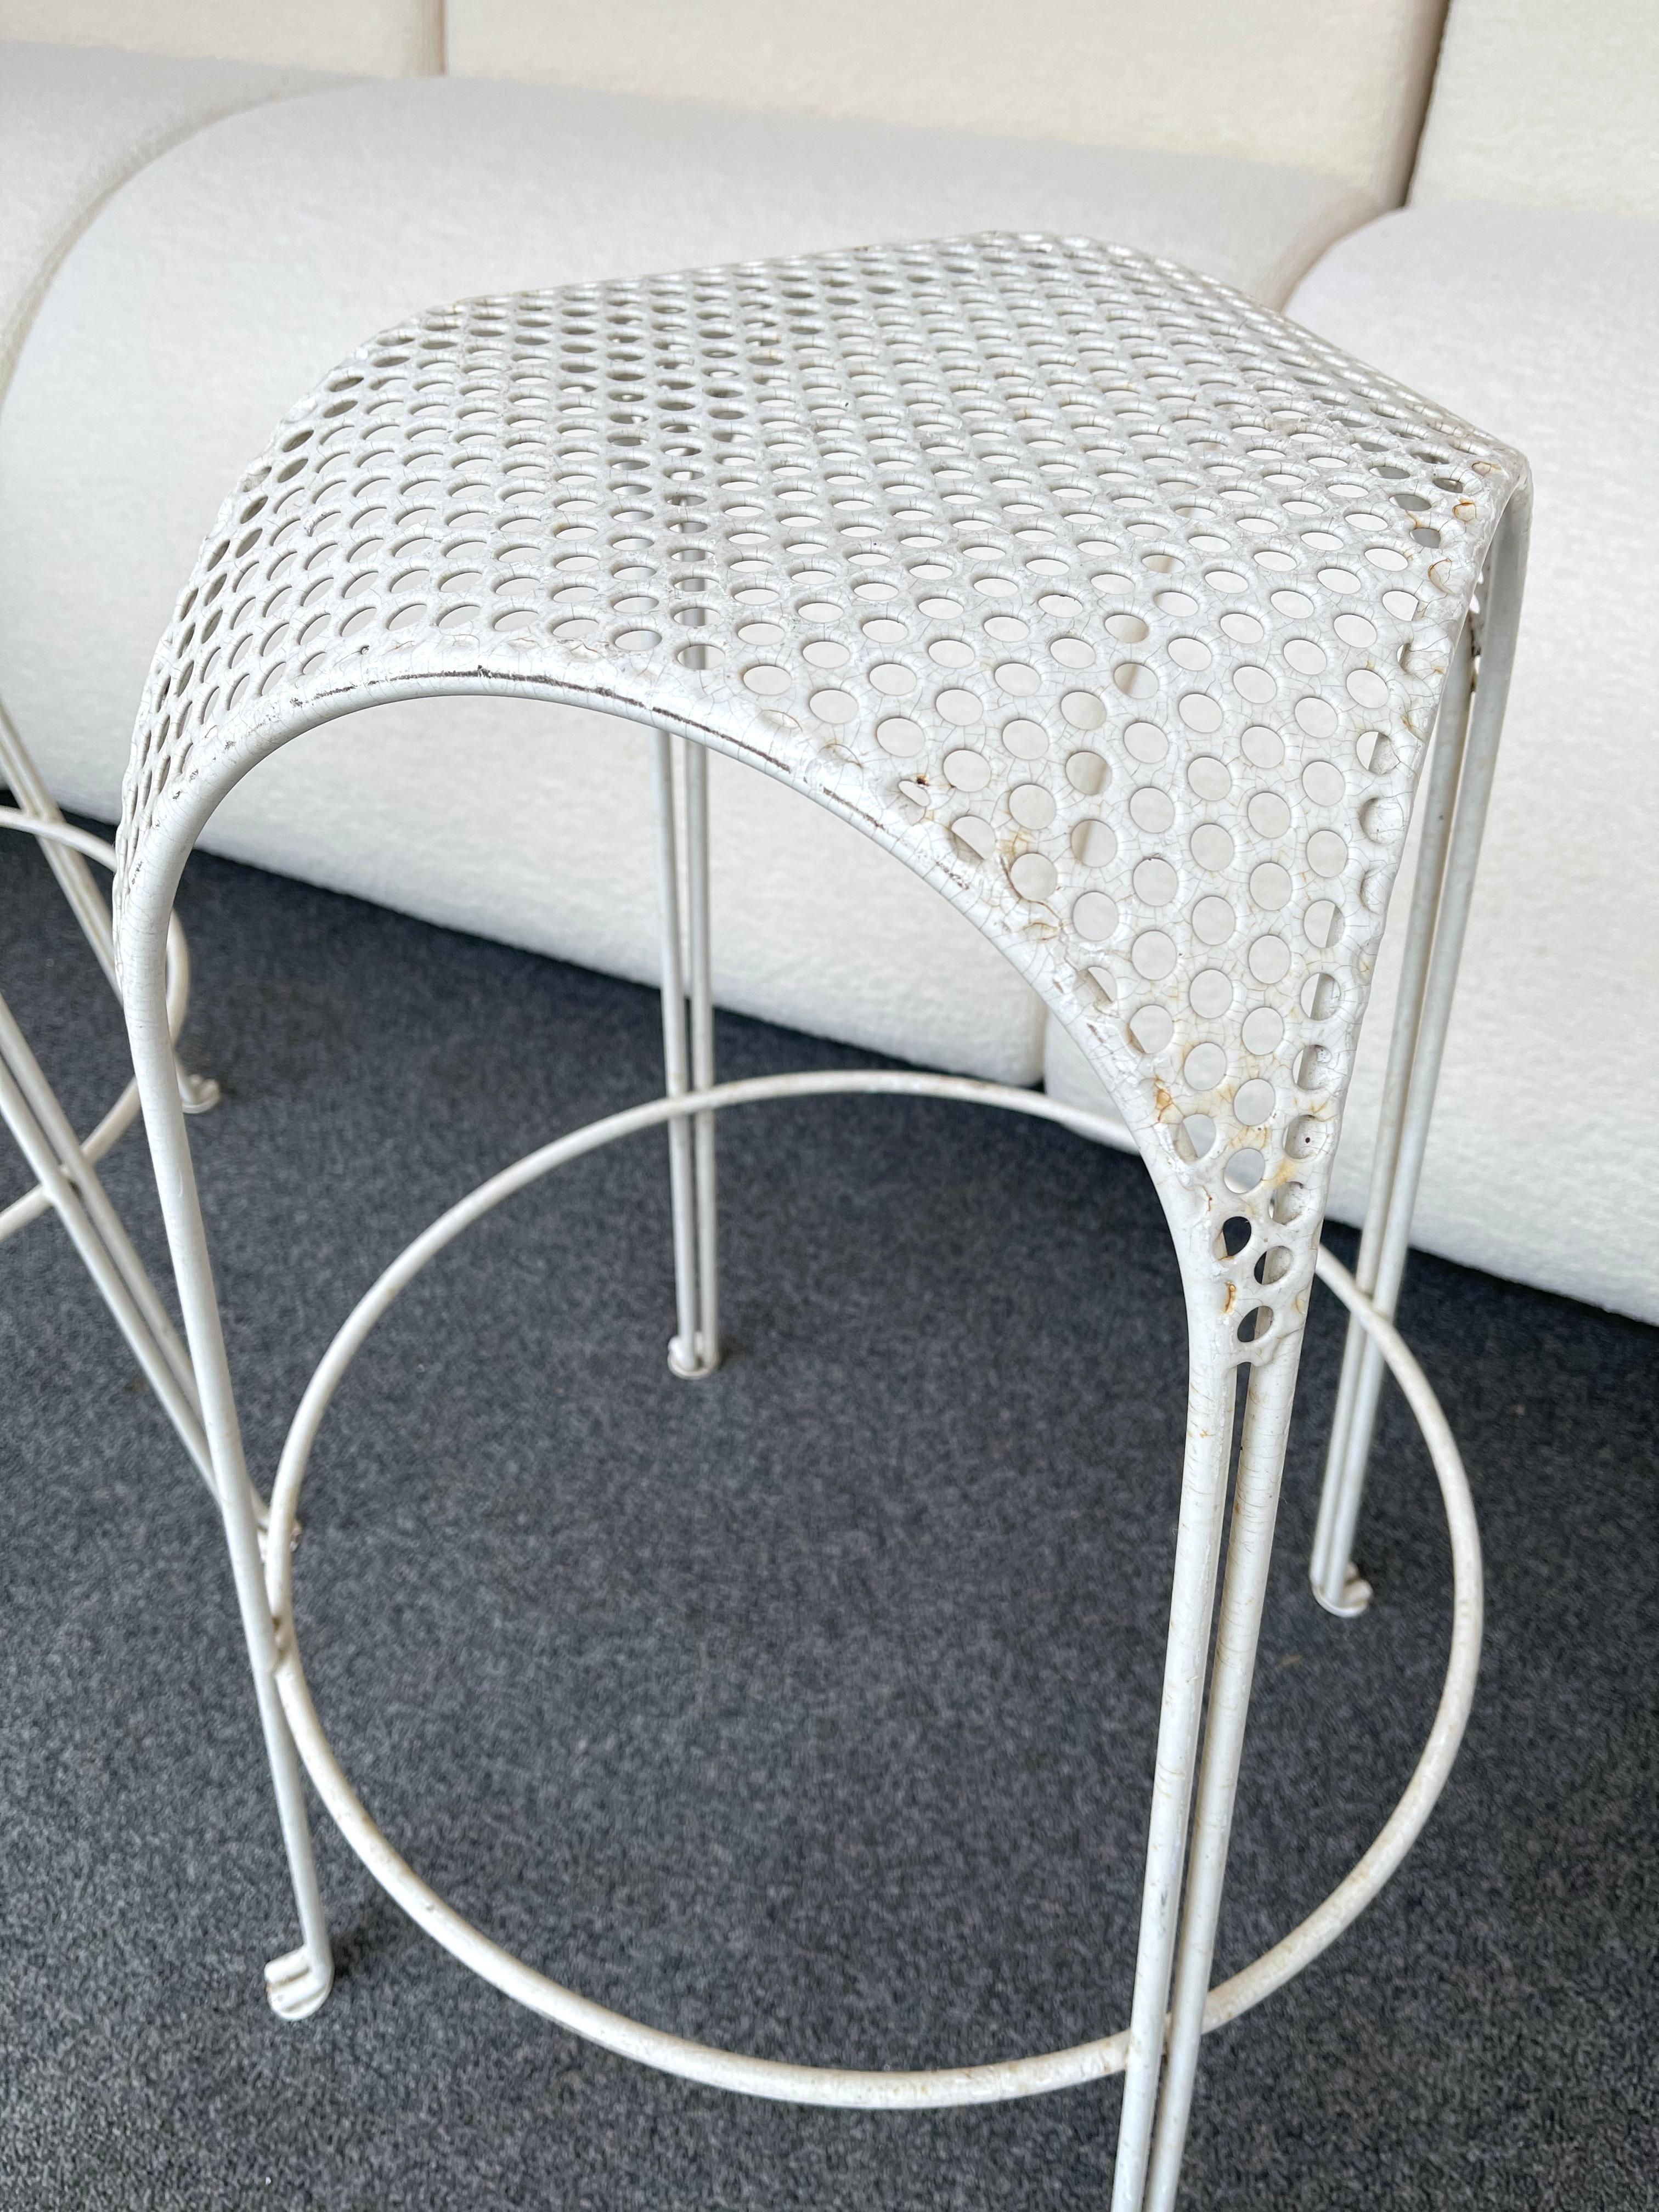 Mid-20th Century Pair of Bar Stools Metal Perforated by Maurizio Tempestini, Italy, 1950s For Sale